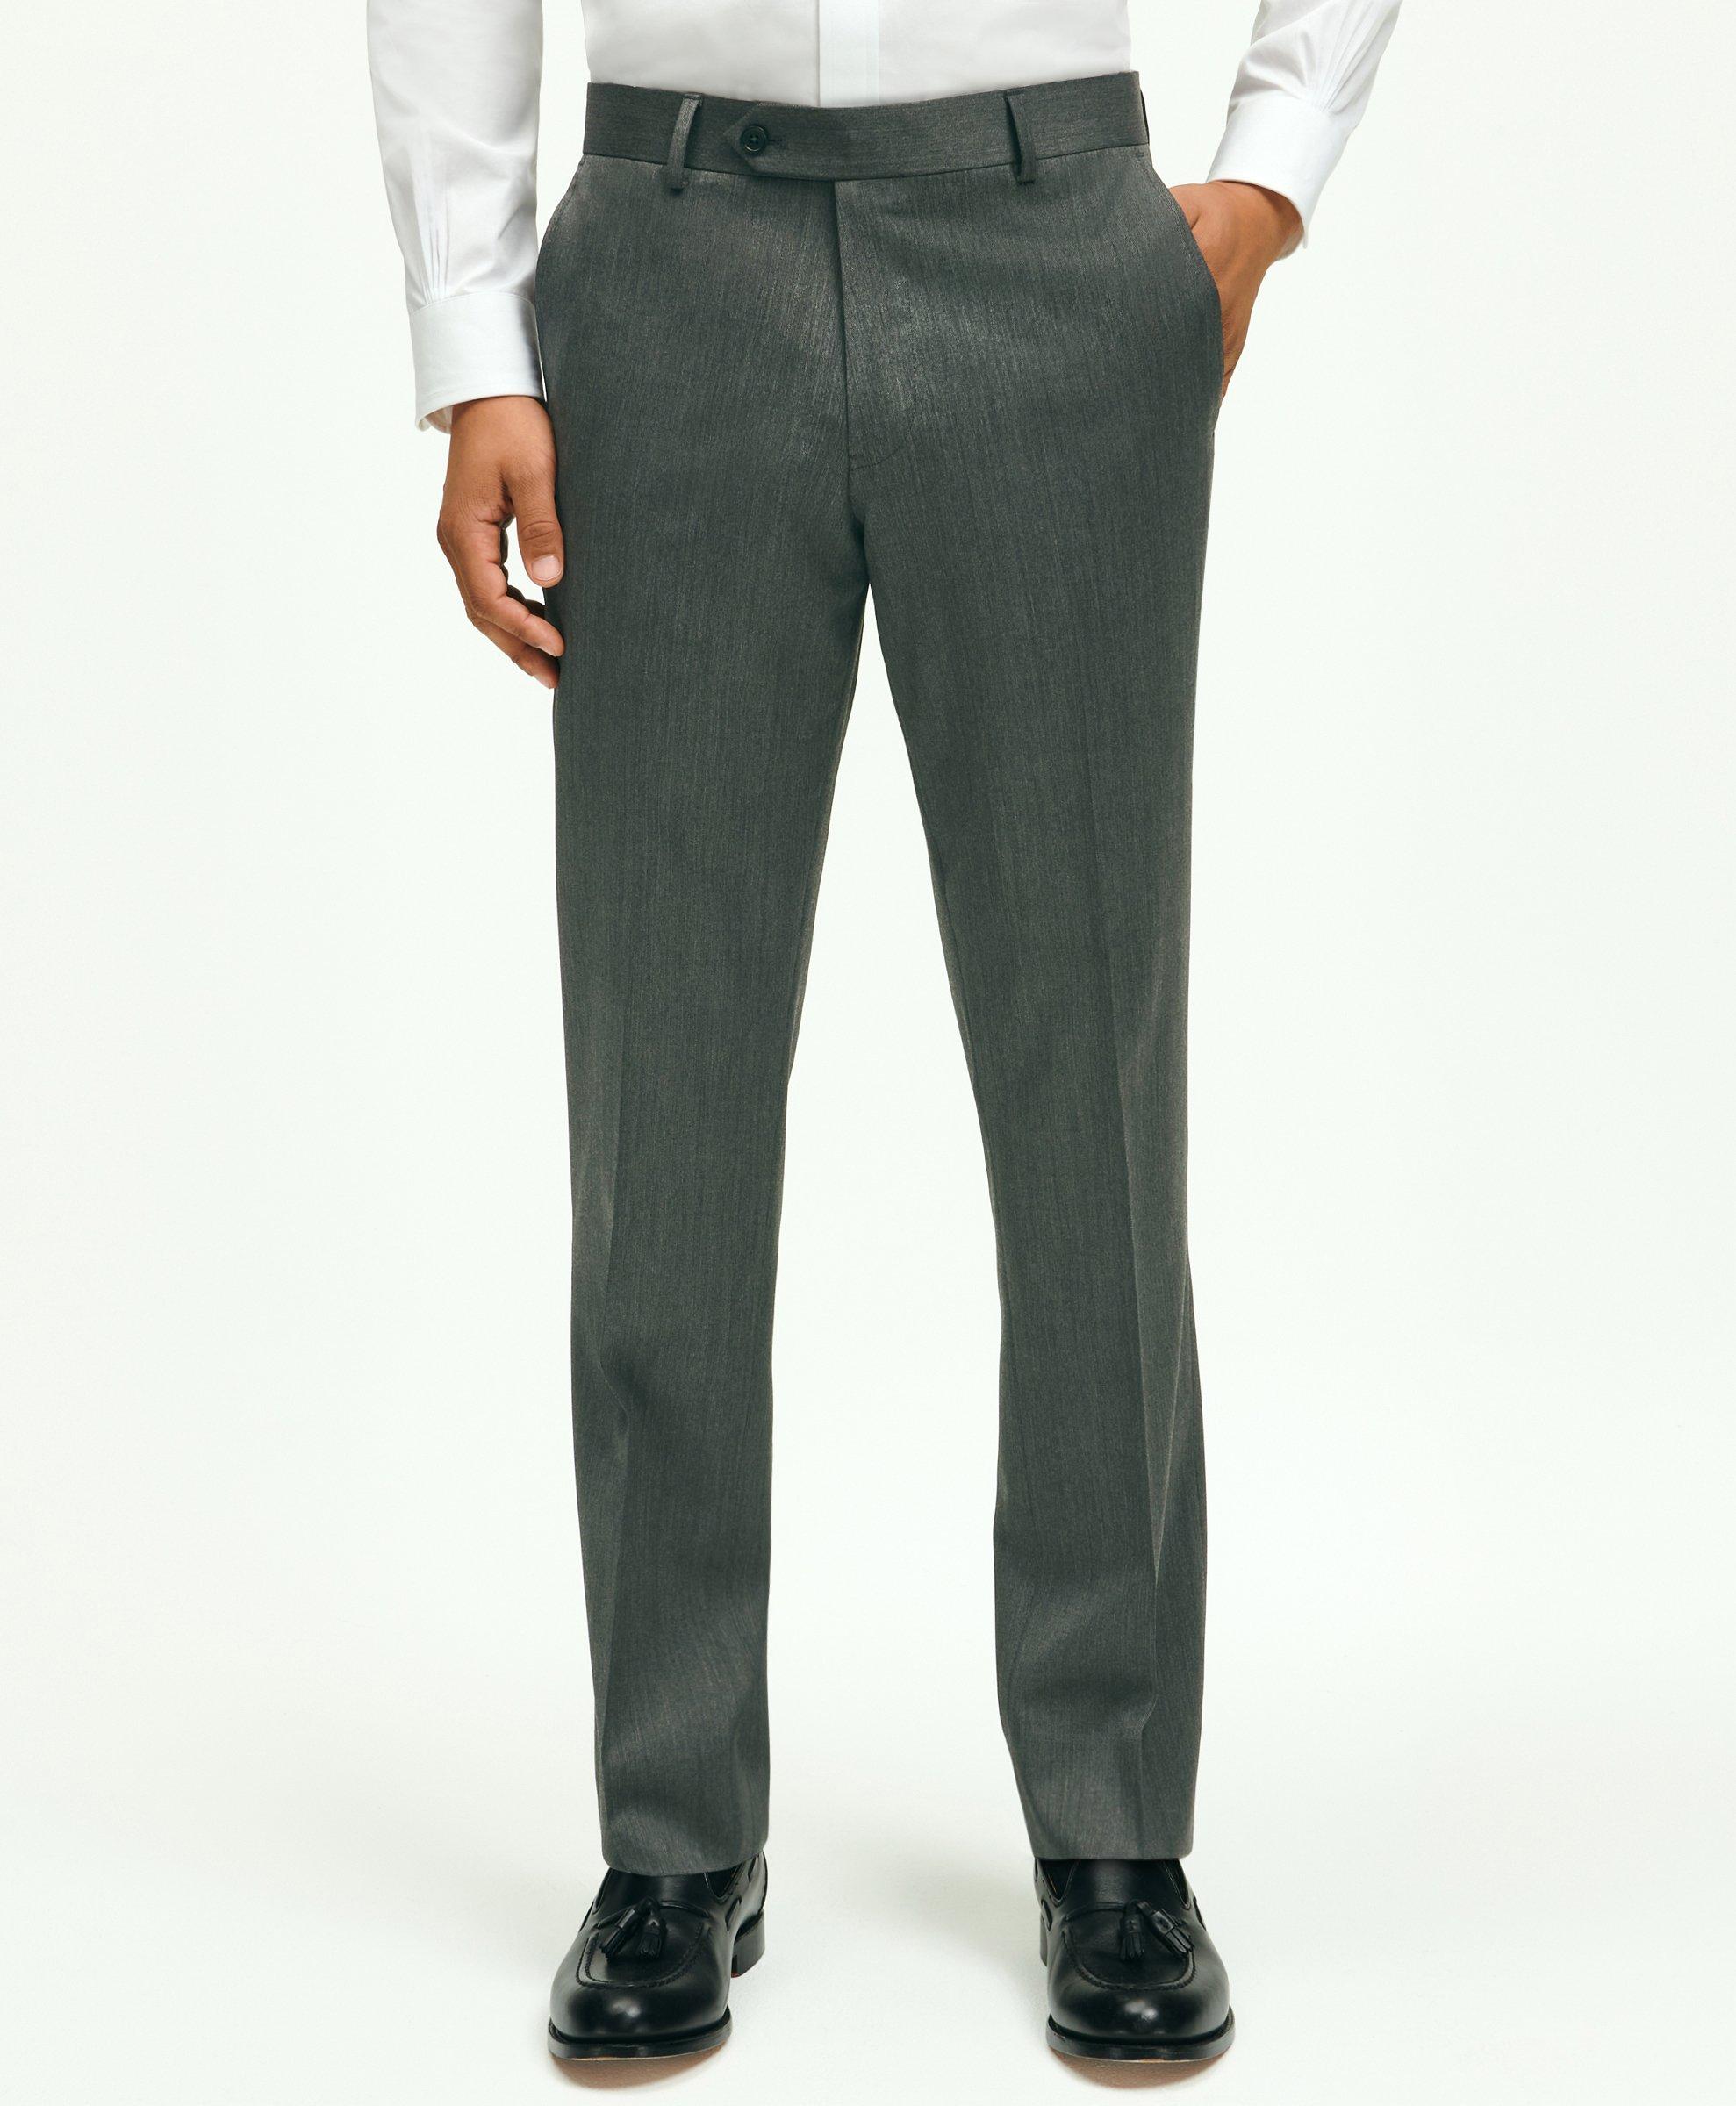 Regular Fit Classic Pants Gray - TIE HOUSE